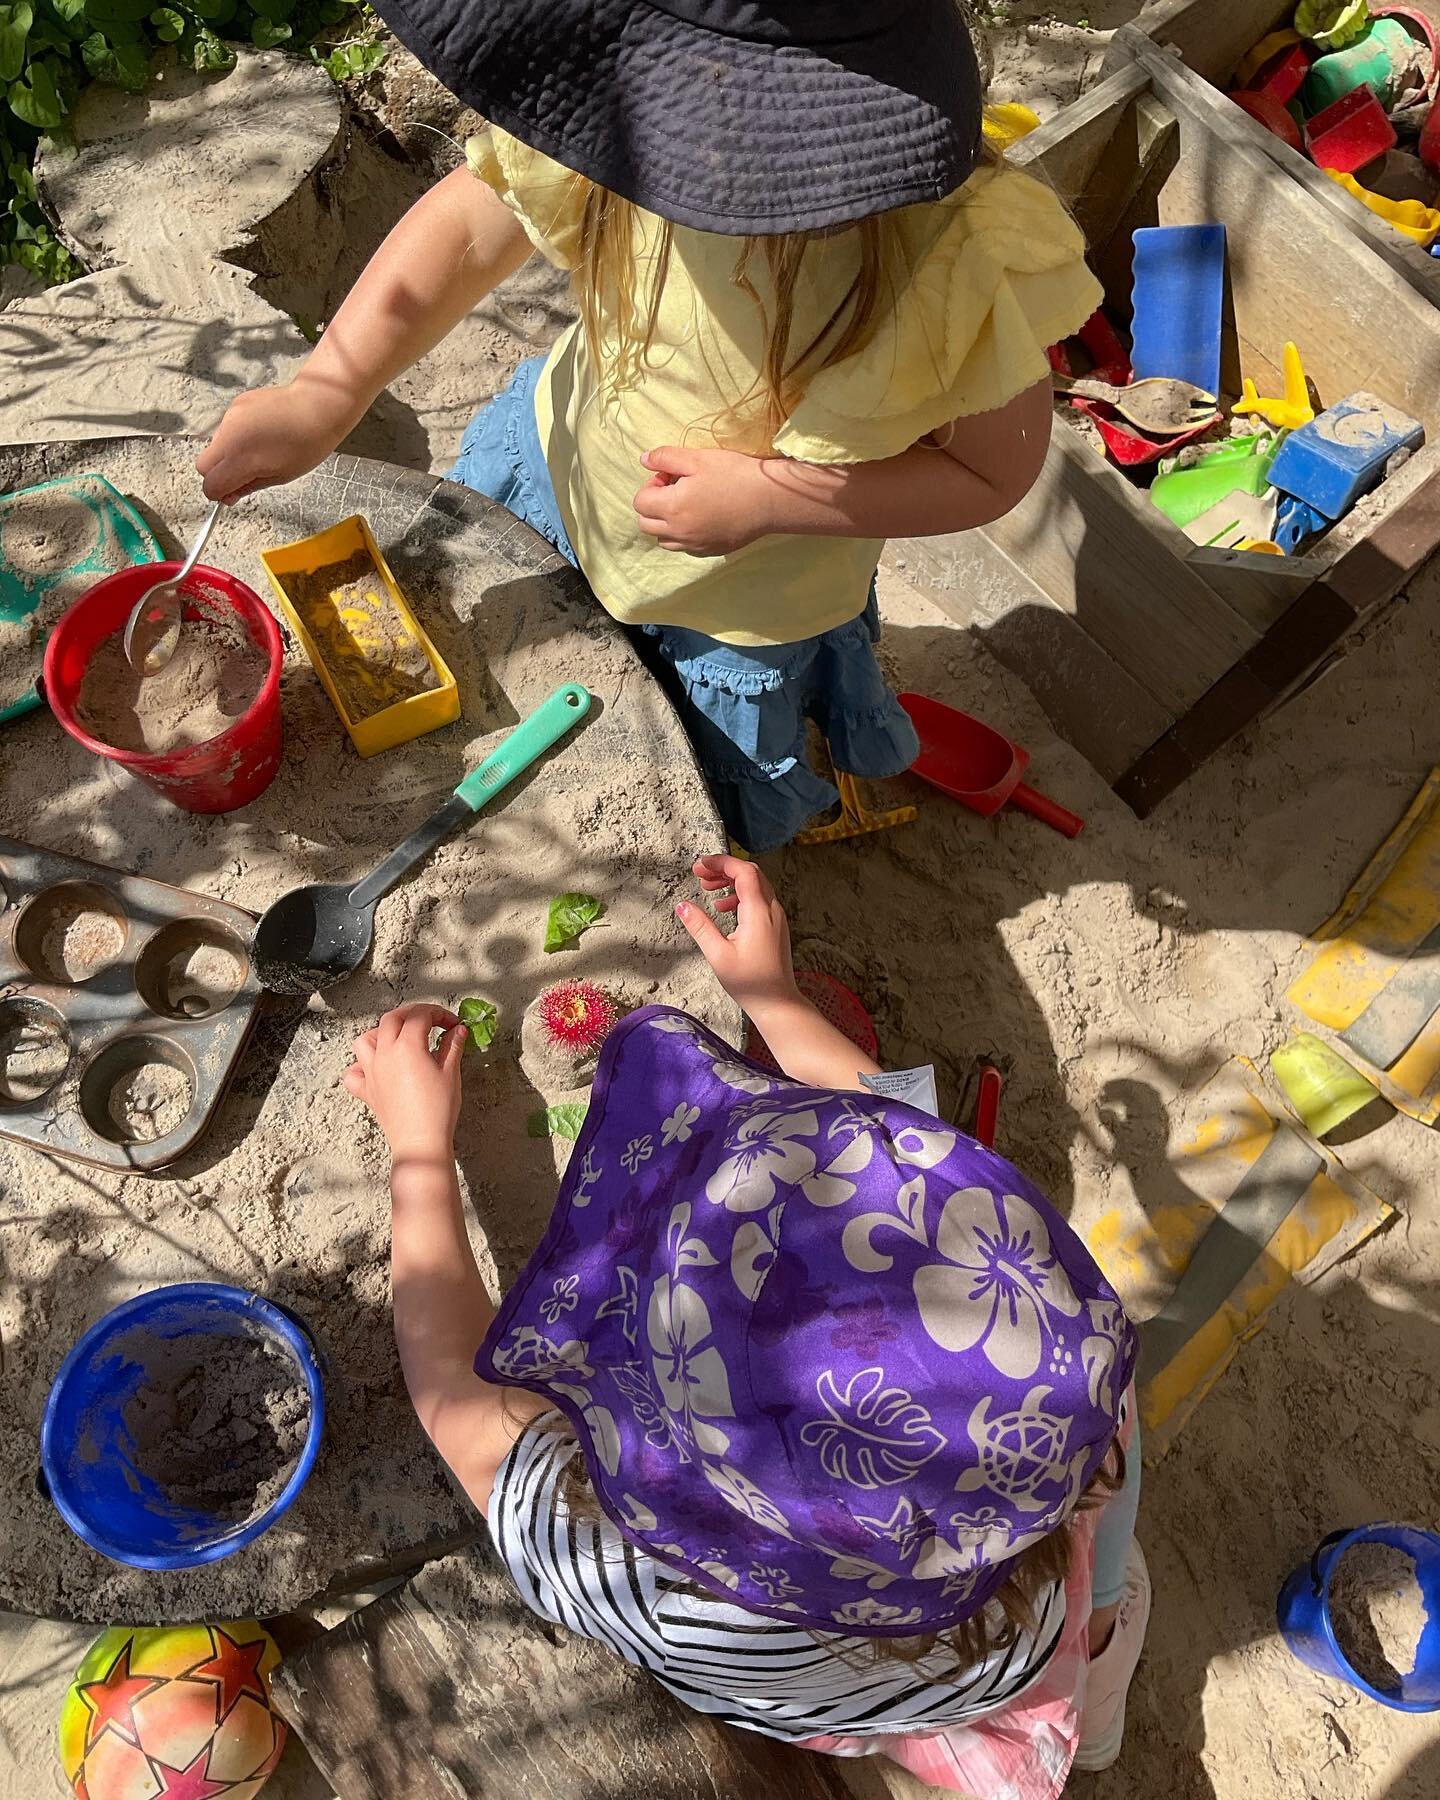 Making sand pit pies in the spring sunshine. A perfect way to spend a sunny afternoon of learning.